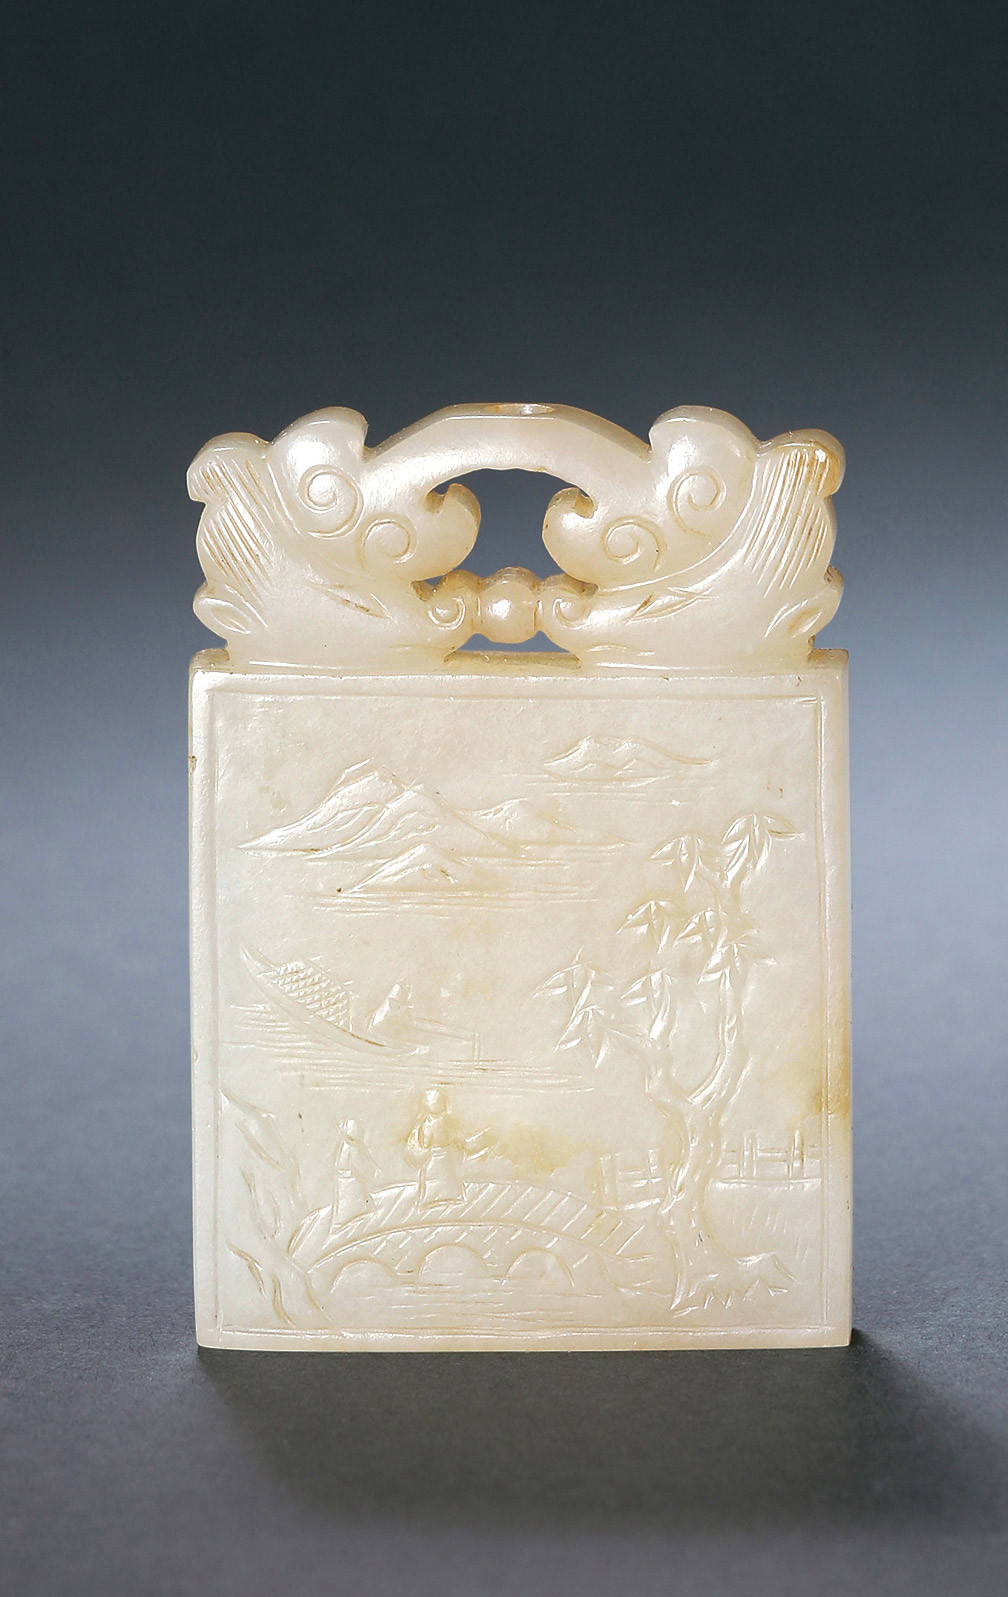 A WHITE JADE PLATE WITH‘LANDSCAPE AND SCHOLAR’POEM